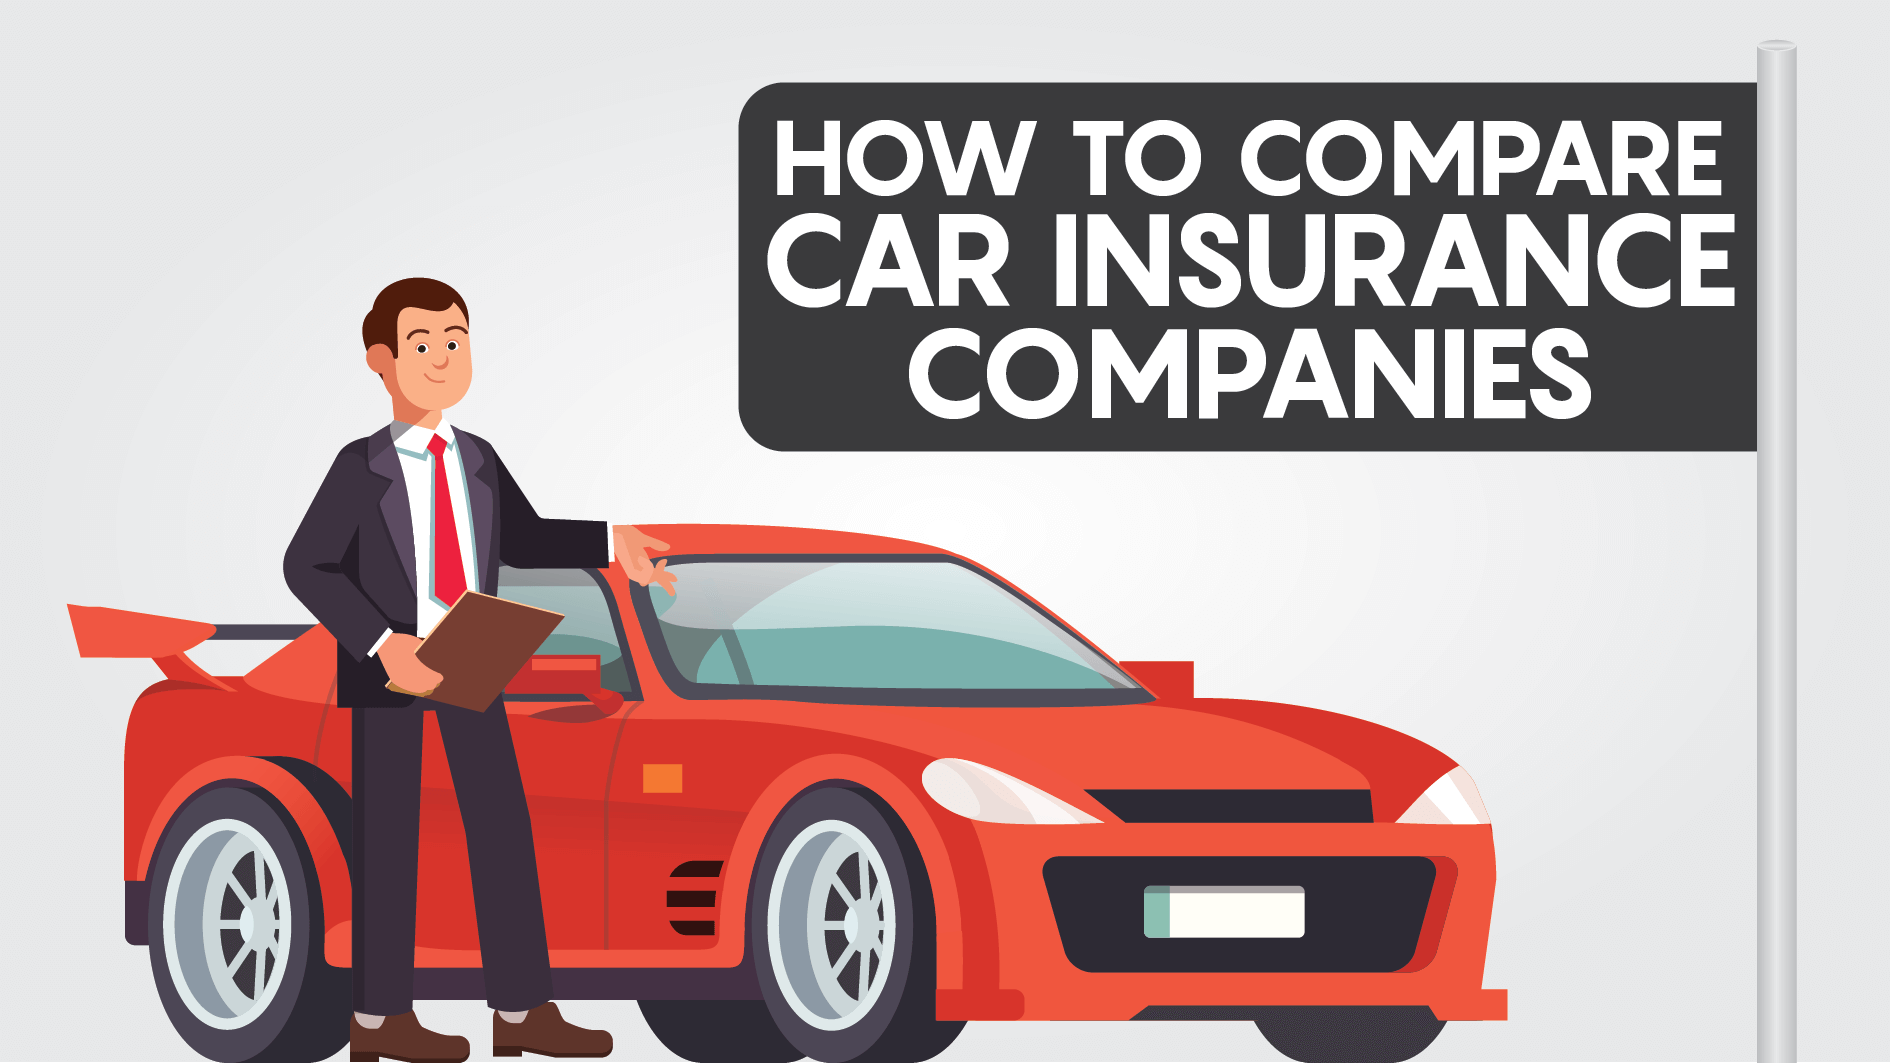 How to Compare Car Insurance Companies